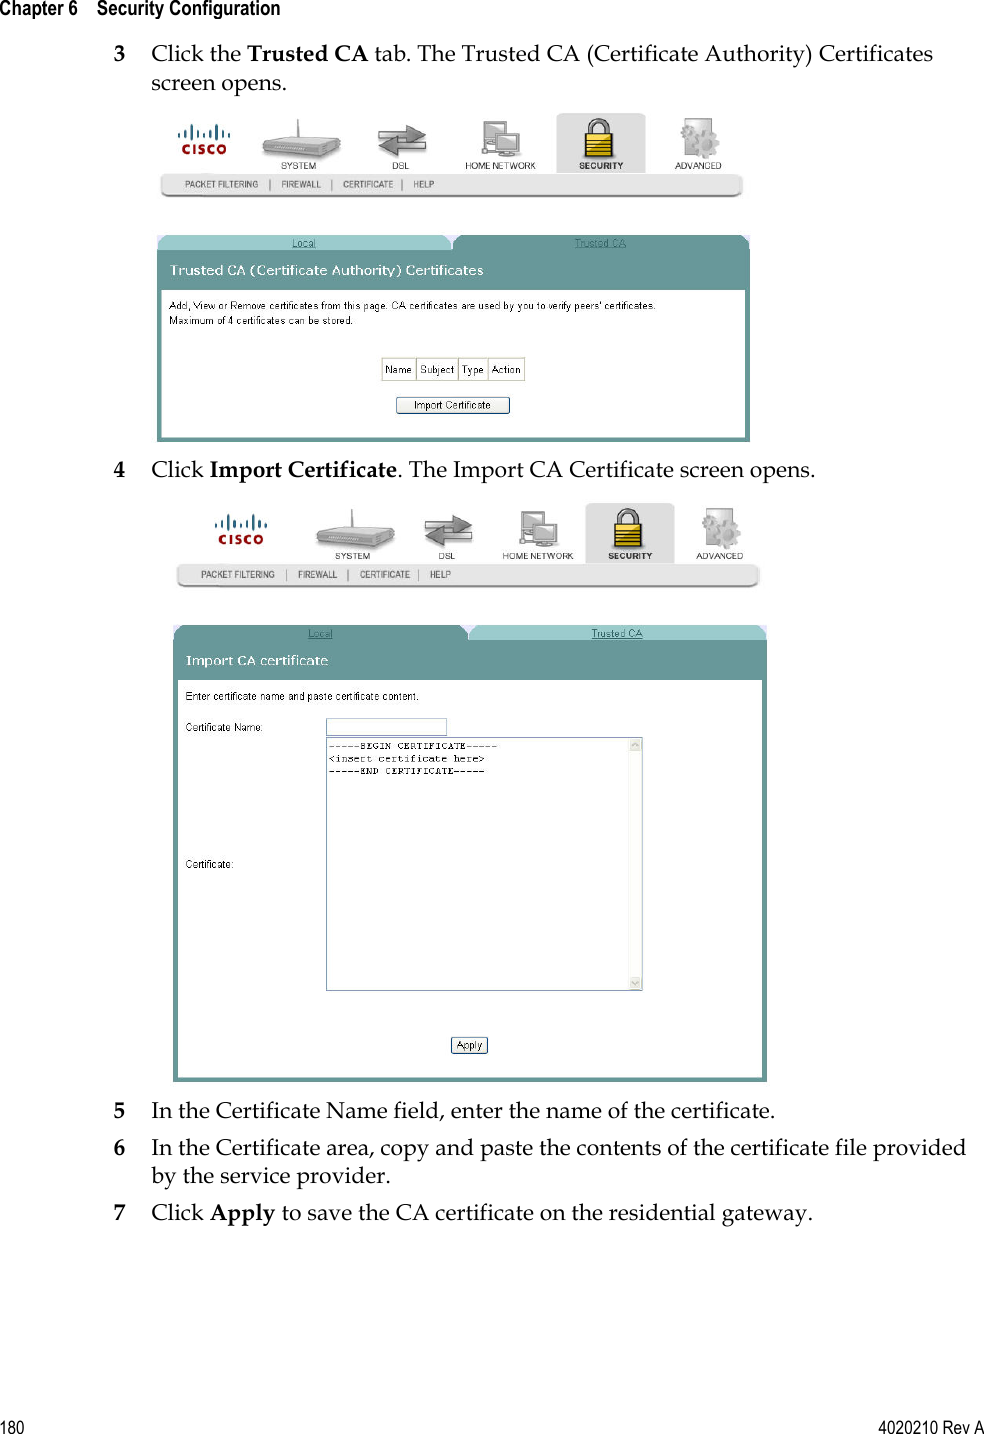  Chapter 6    Security Configuration   180  4020210 Rev A 3 Click the Trusted CA tab. The Trusted CA (Certificate Authority) Certificates screen opens.  4 Click Import Certificate. The Import CA Certificate screen opens.  5 In the Certificate Name field, enter the name of the certificate. 6 In the Certificate area, copy and paste the contents of the certificate file provided by the service provider. 7 Click Apply to save the CA certificate on the residential gateway.   